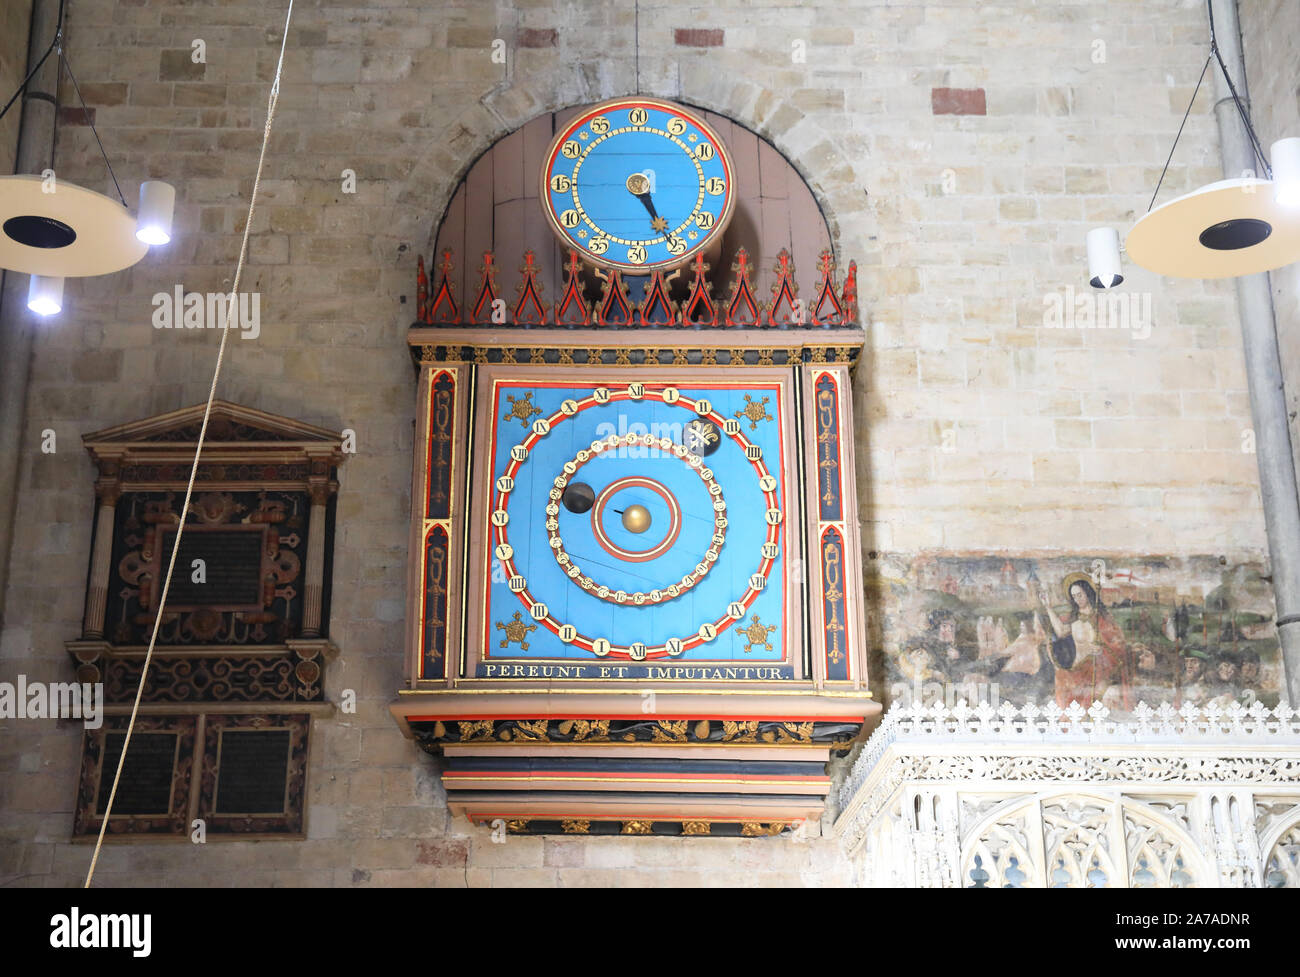 The 15th century historical astronomical clock, a working model of the solar system, in Exeter Cathedral, in Devon, UK Stock Photo